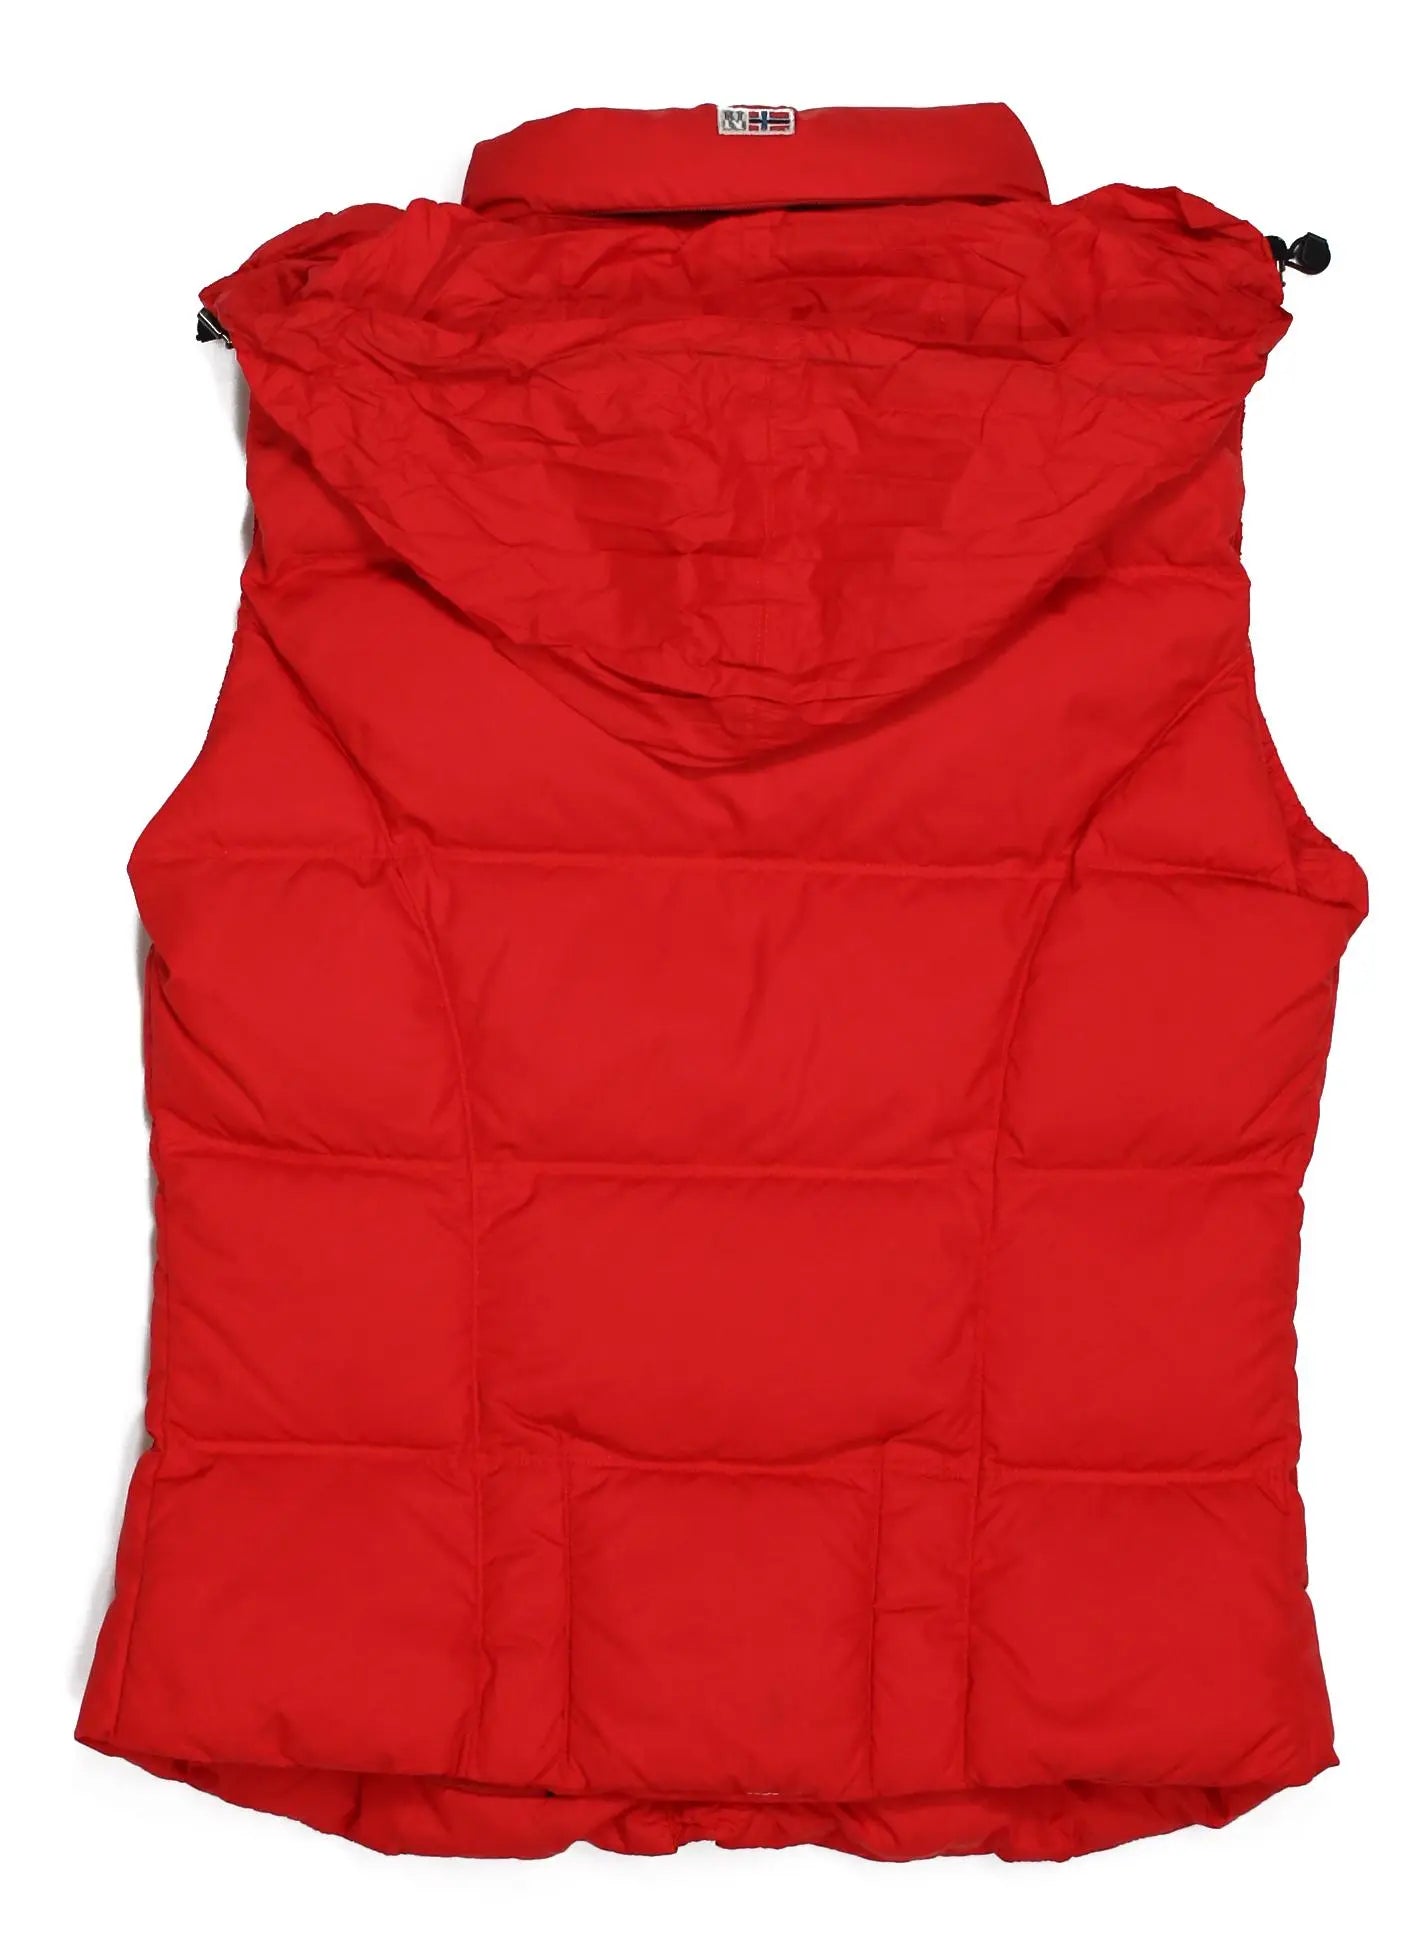 Napapijri - Red Sleeveless Puffer Jacket by Napapijri- ThriftTale.com - Vintage and second handclothing